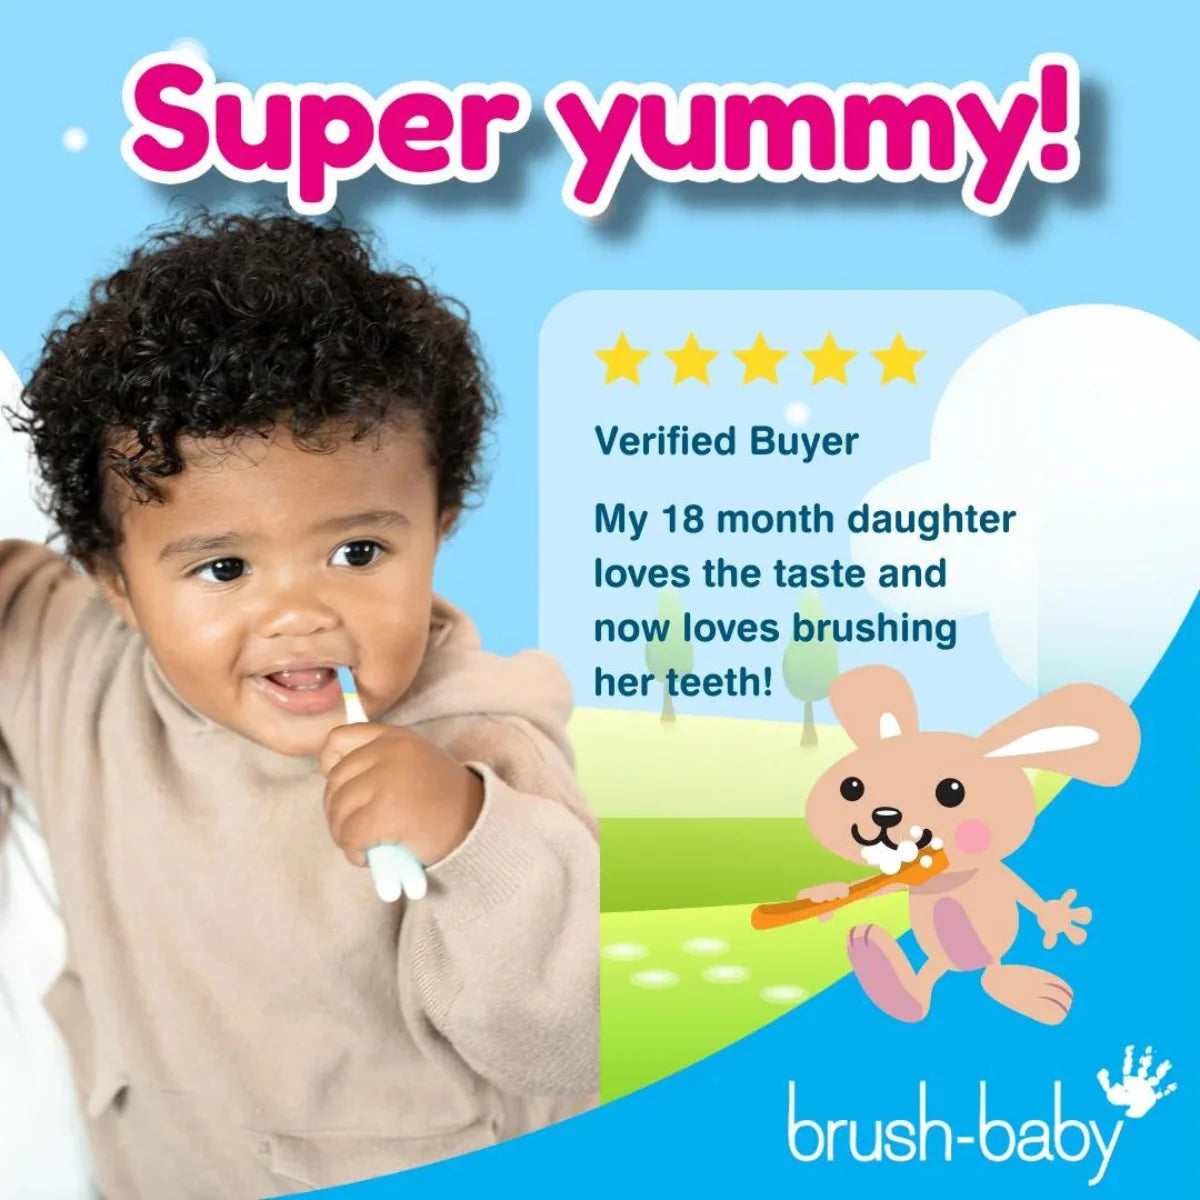 Brush Baby Applemint baby toothpaste for babies